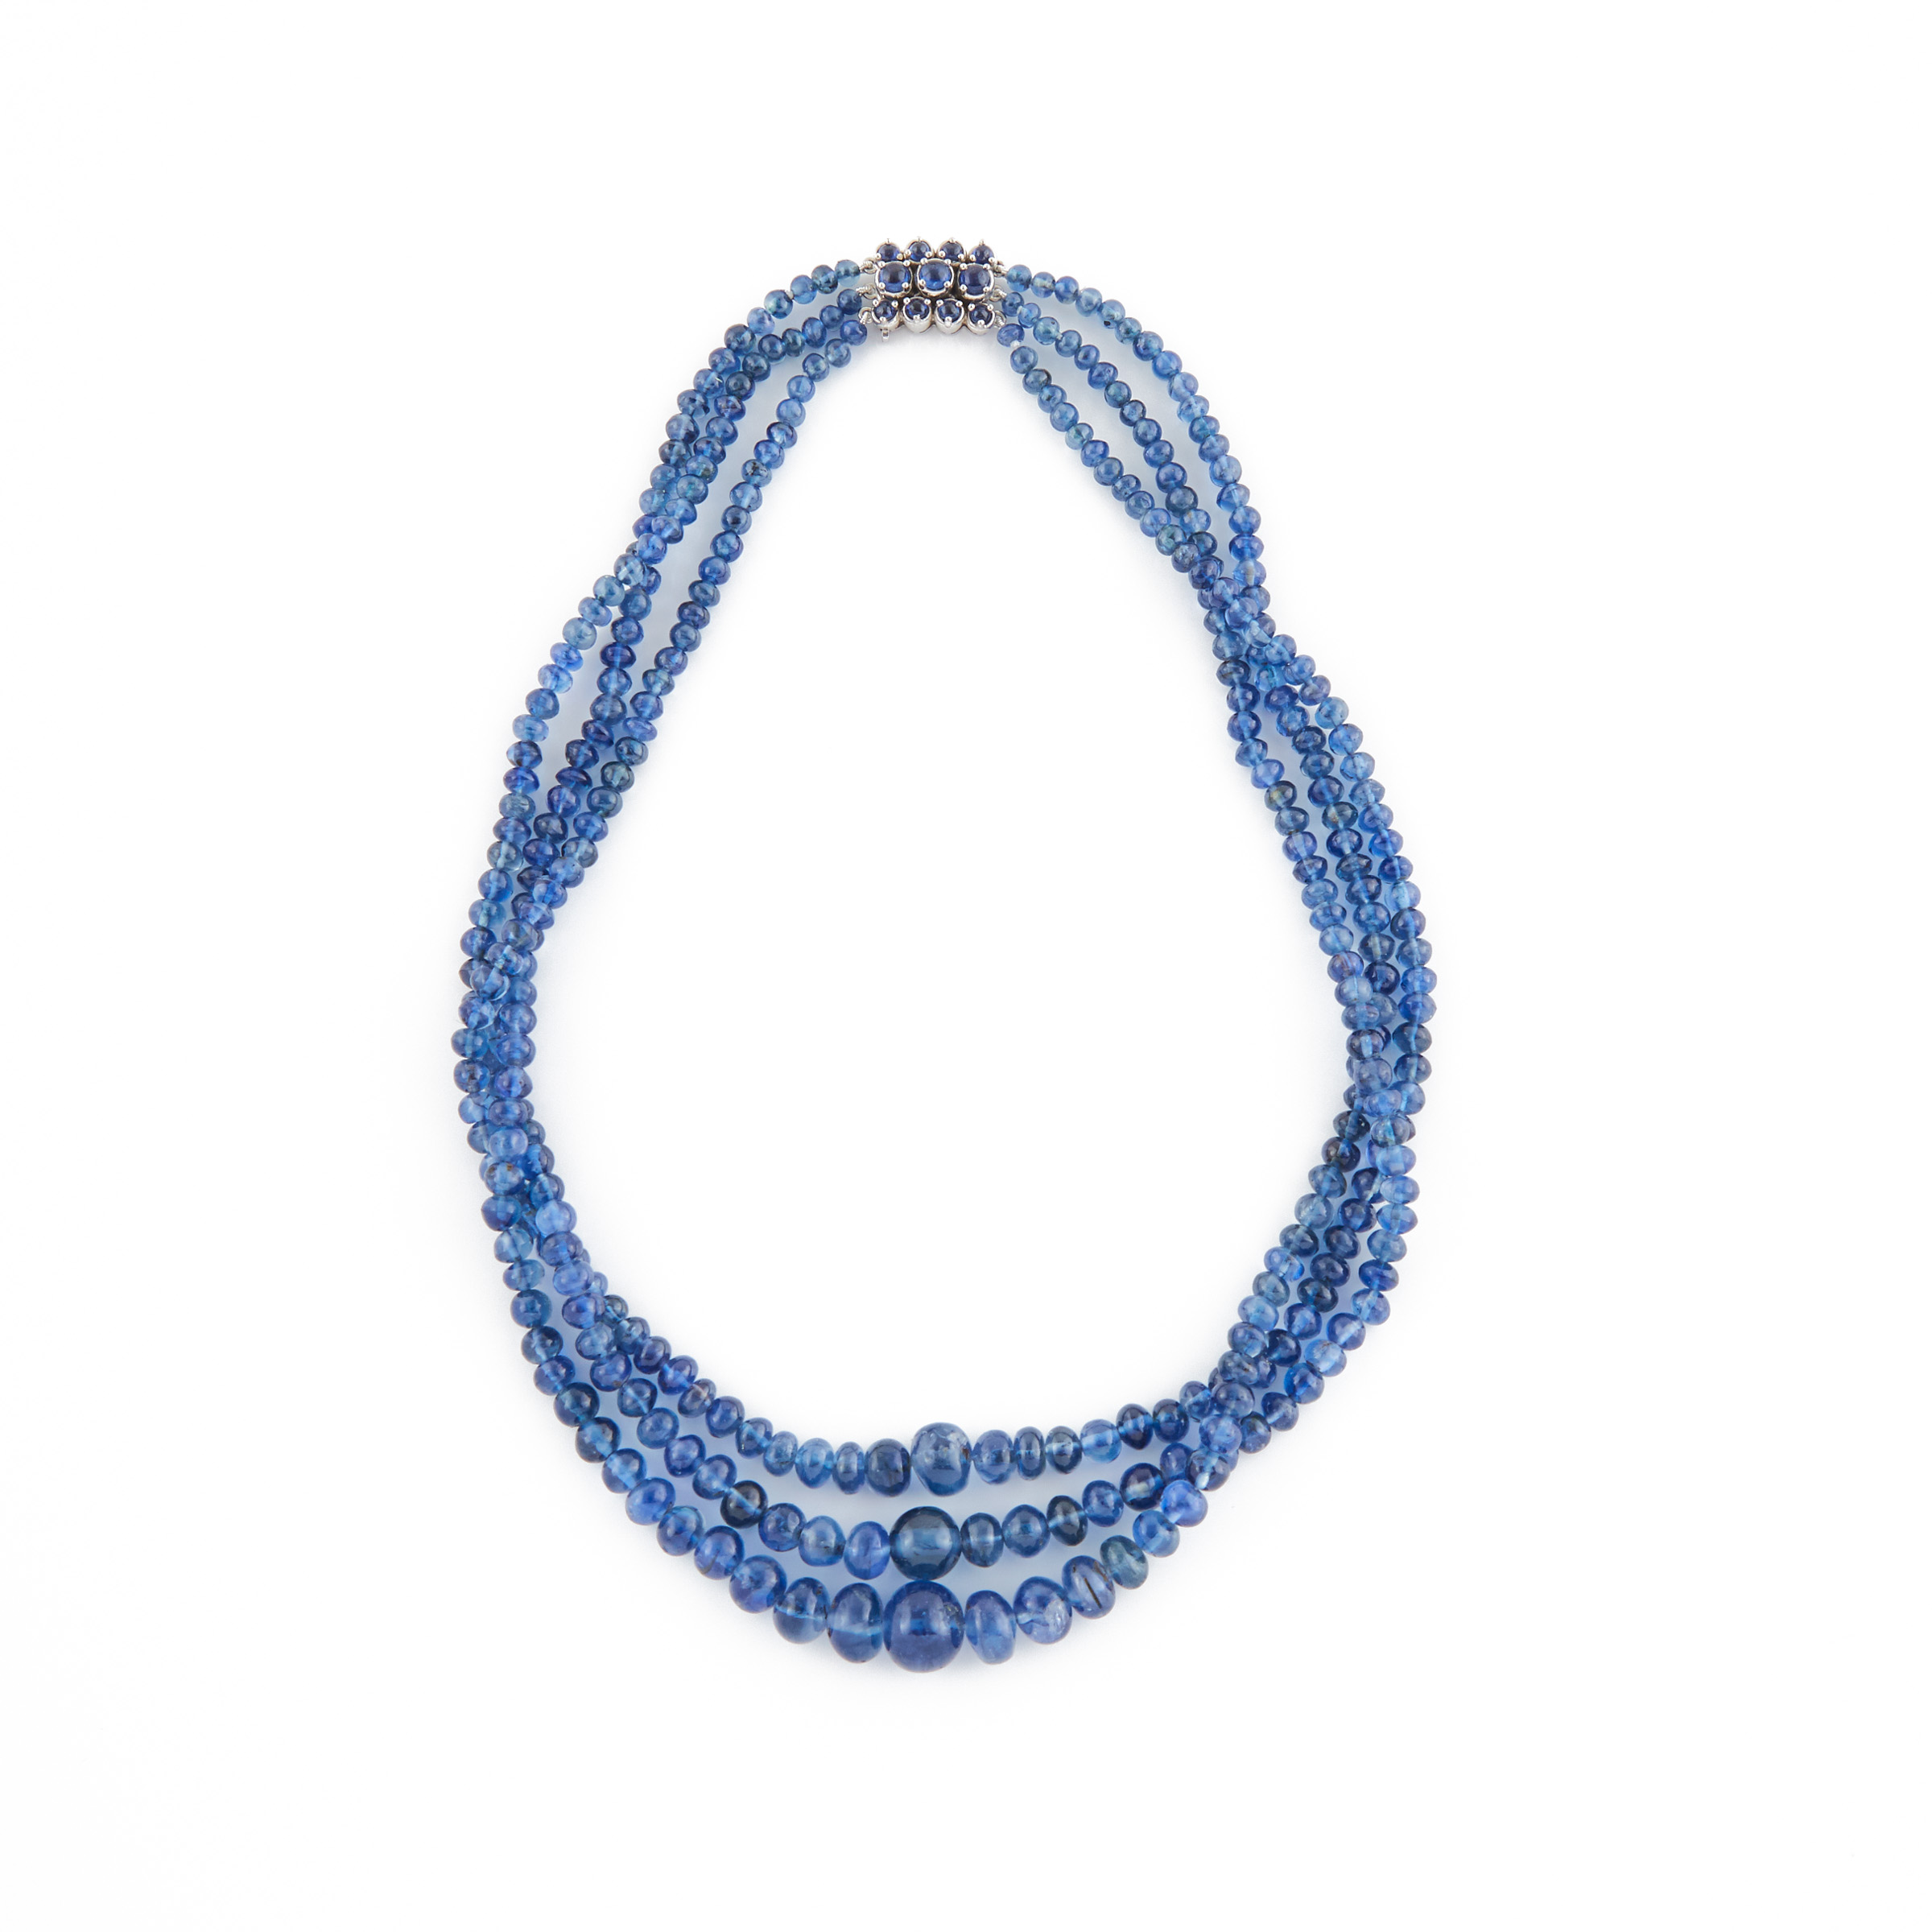 Meister Triple Strand Graduated Sapphire Bead Necklace